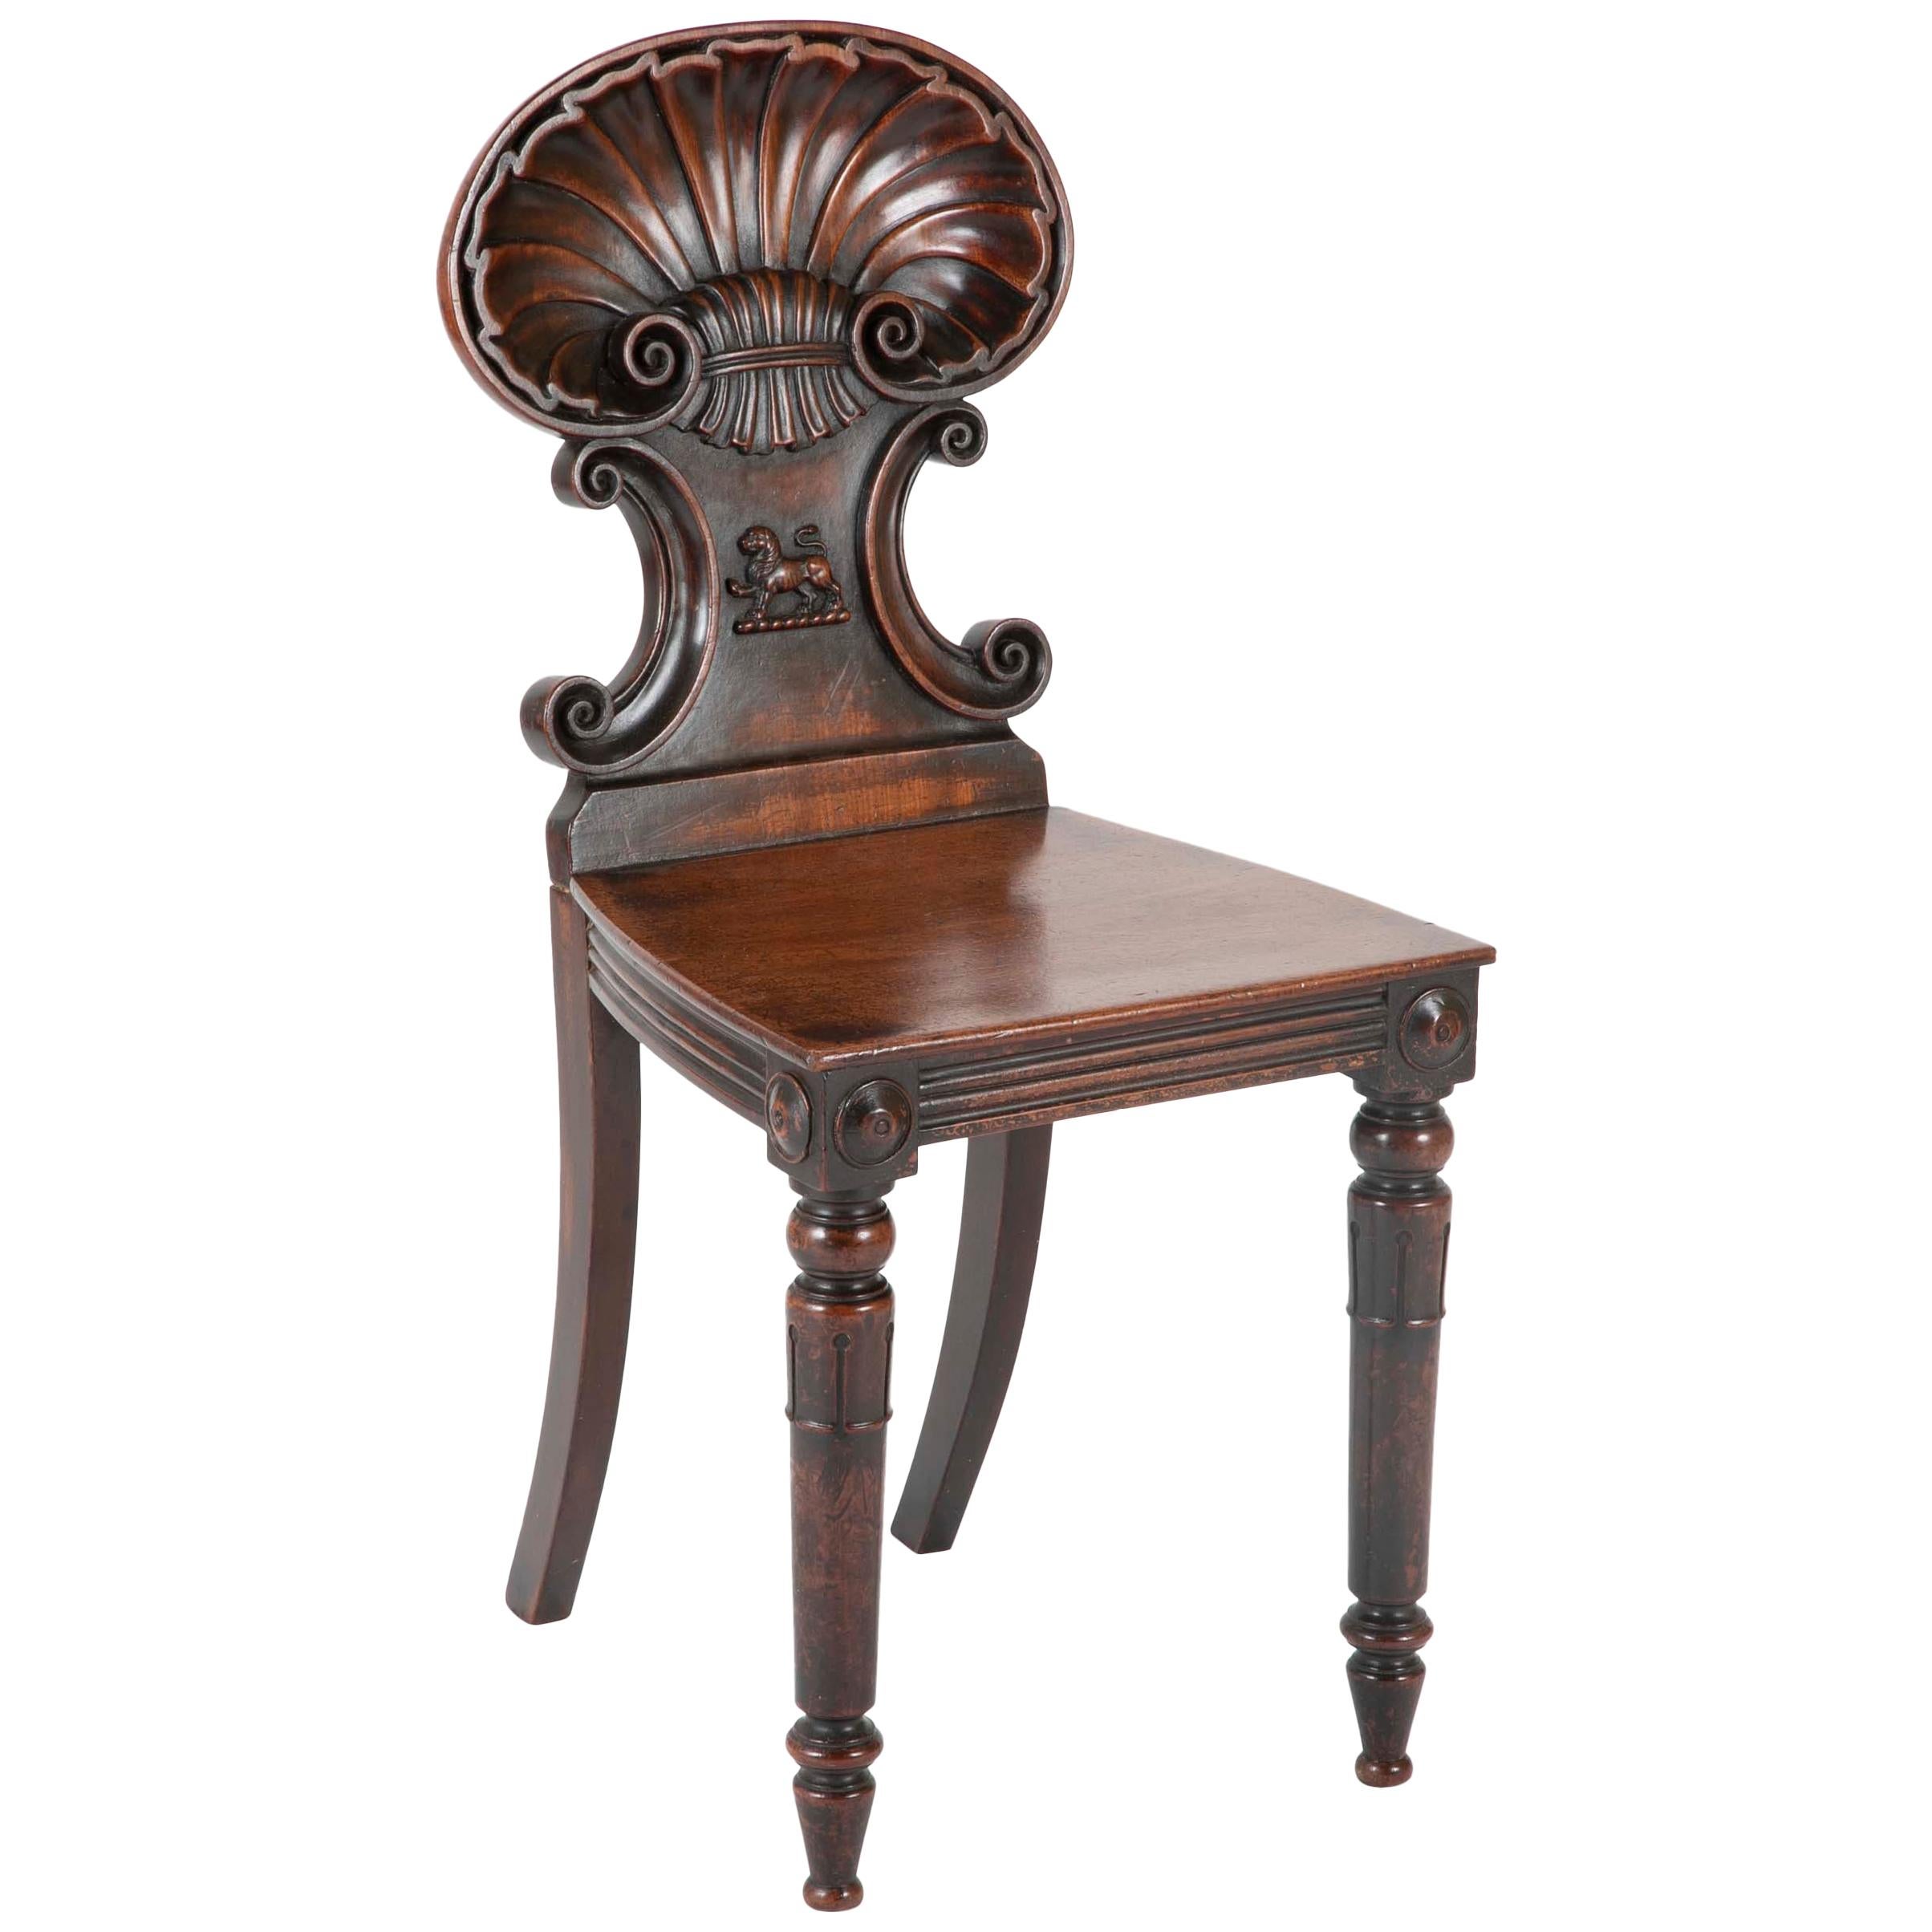 Early 19th Century Georgian Shell Back Hall Chair with Lion Carving